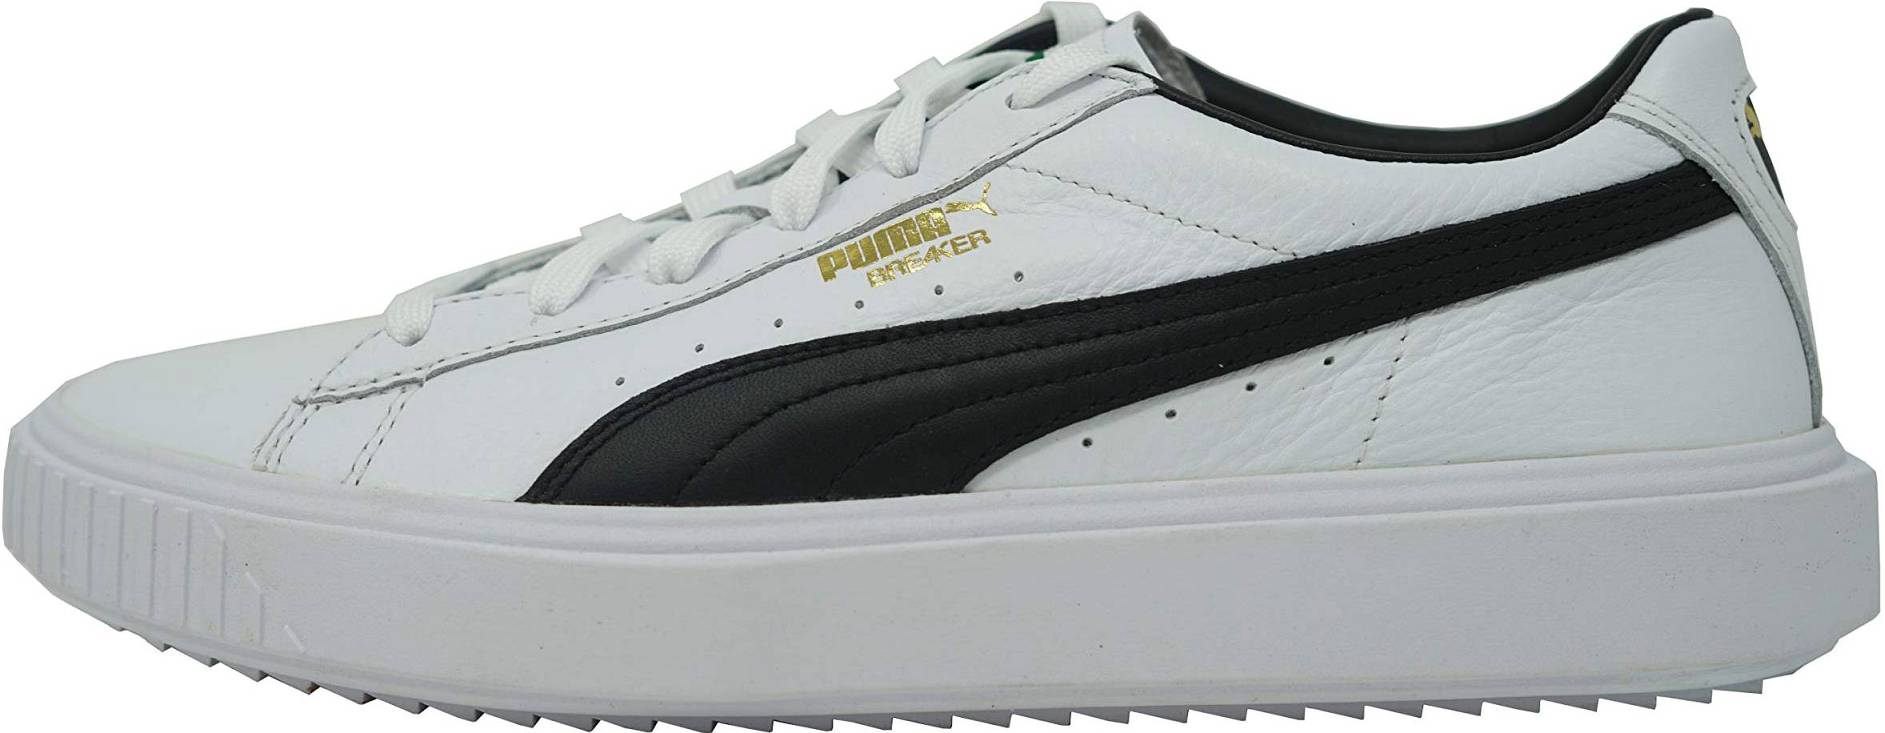 Puma Breaker Leather – Shoes Reviews & Reasons To Buy